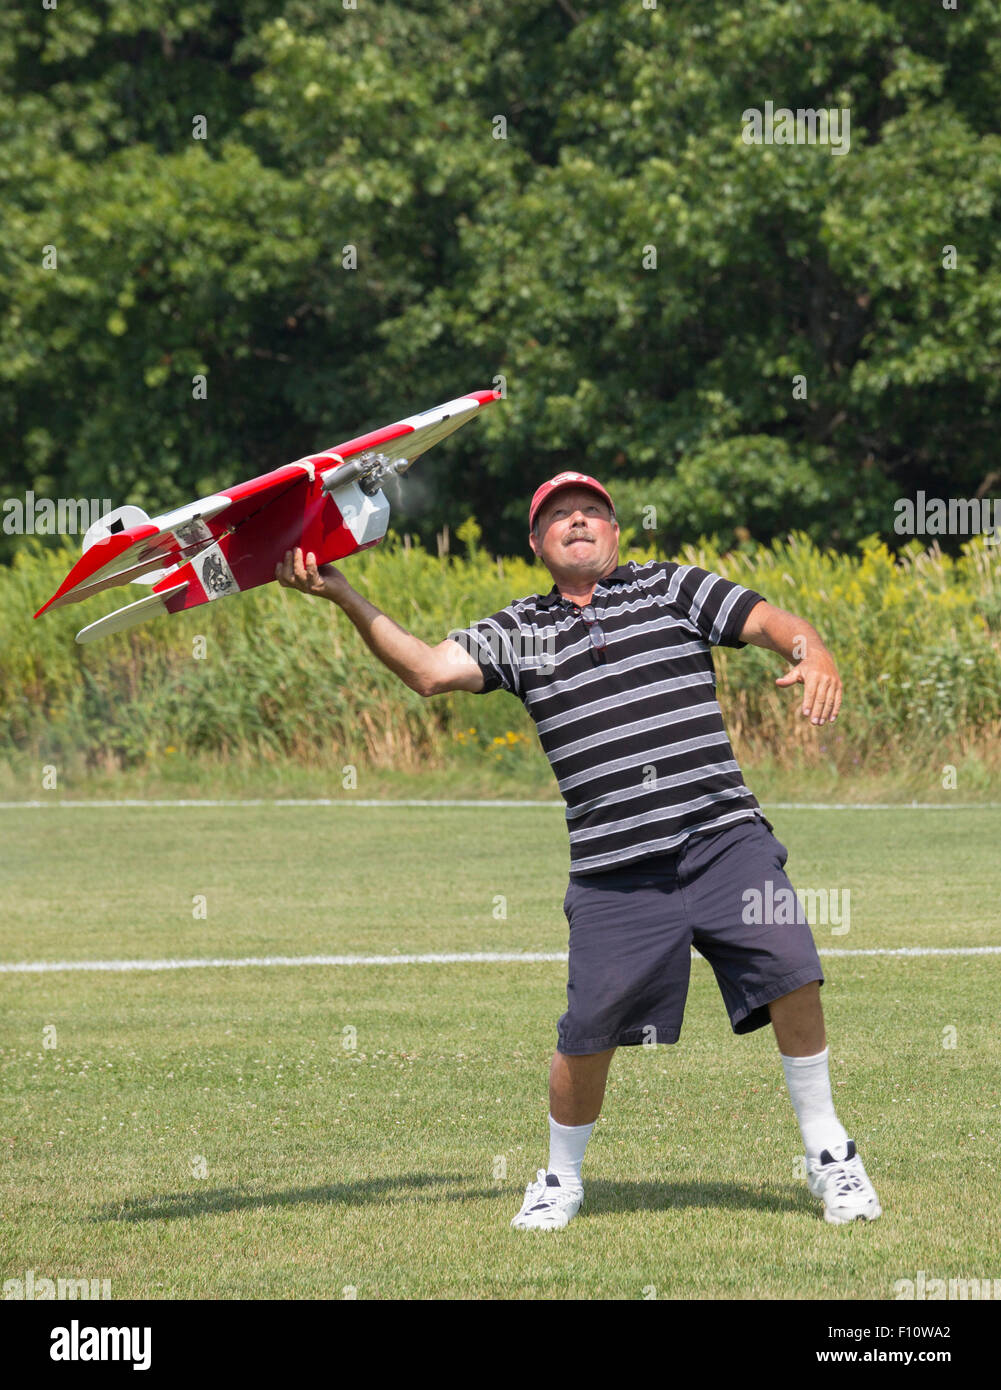 White Lake, Michigan - A member of the Pontiac Miniature Aircraft Club launches a remote-controlled miniature airplane. Stock Photo